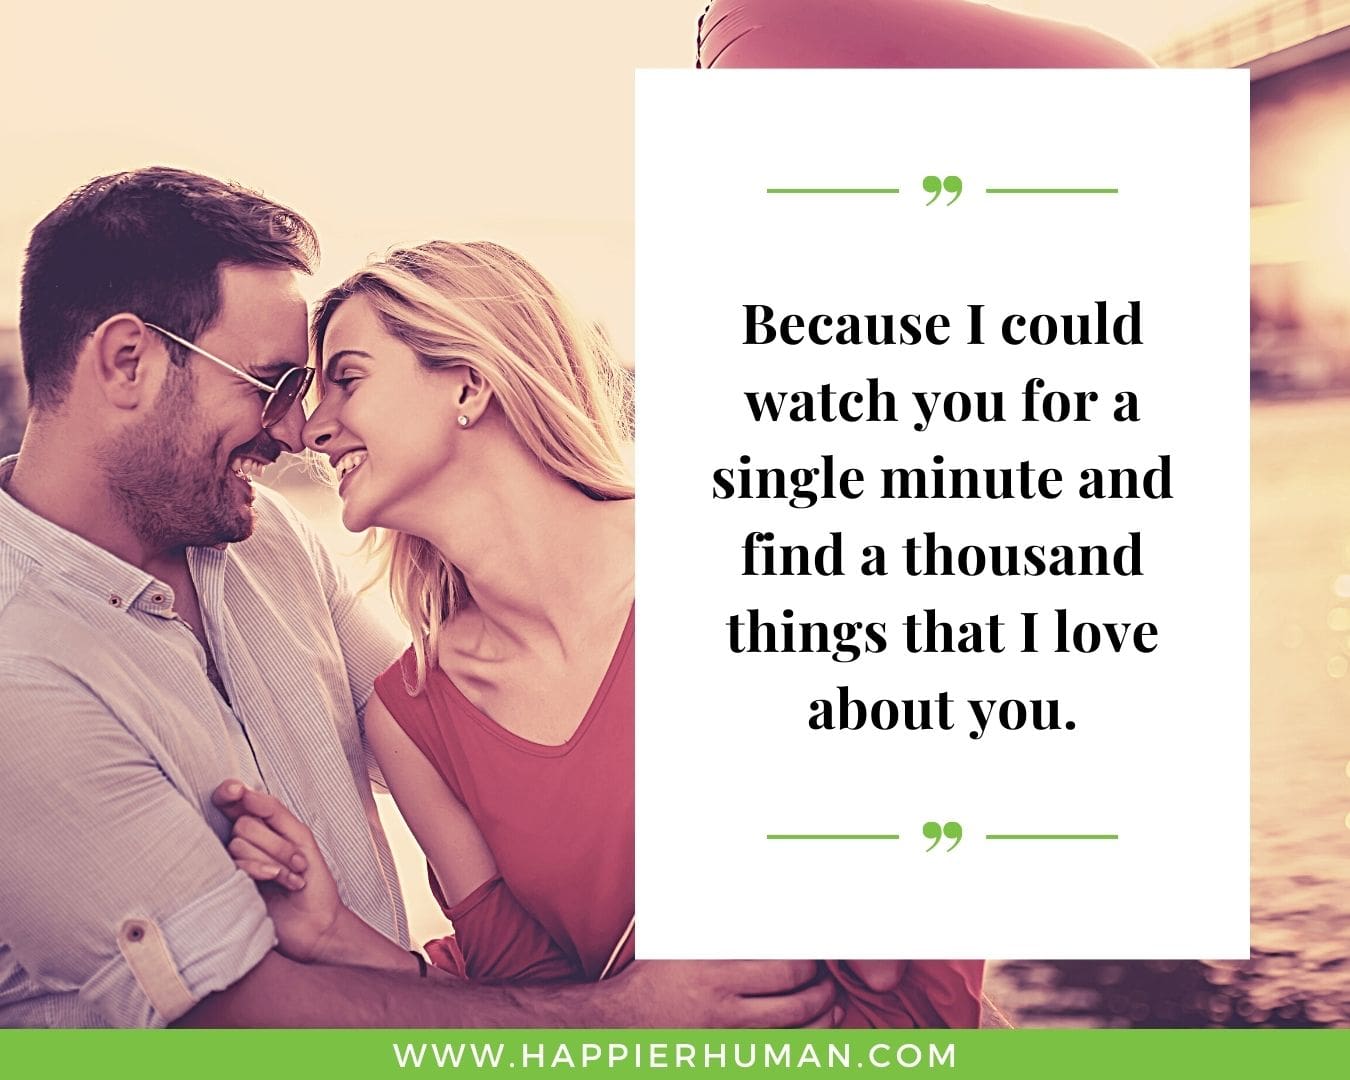 Life and Love Quotes for Her - “Because I could watch you for a single minute and find a thousand things that I love about you.”